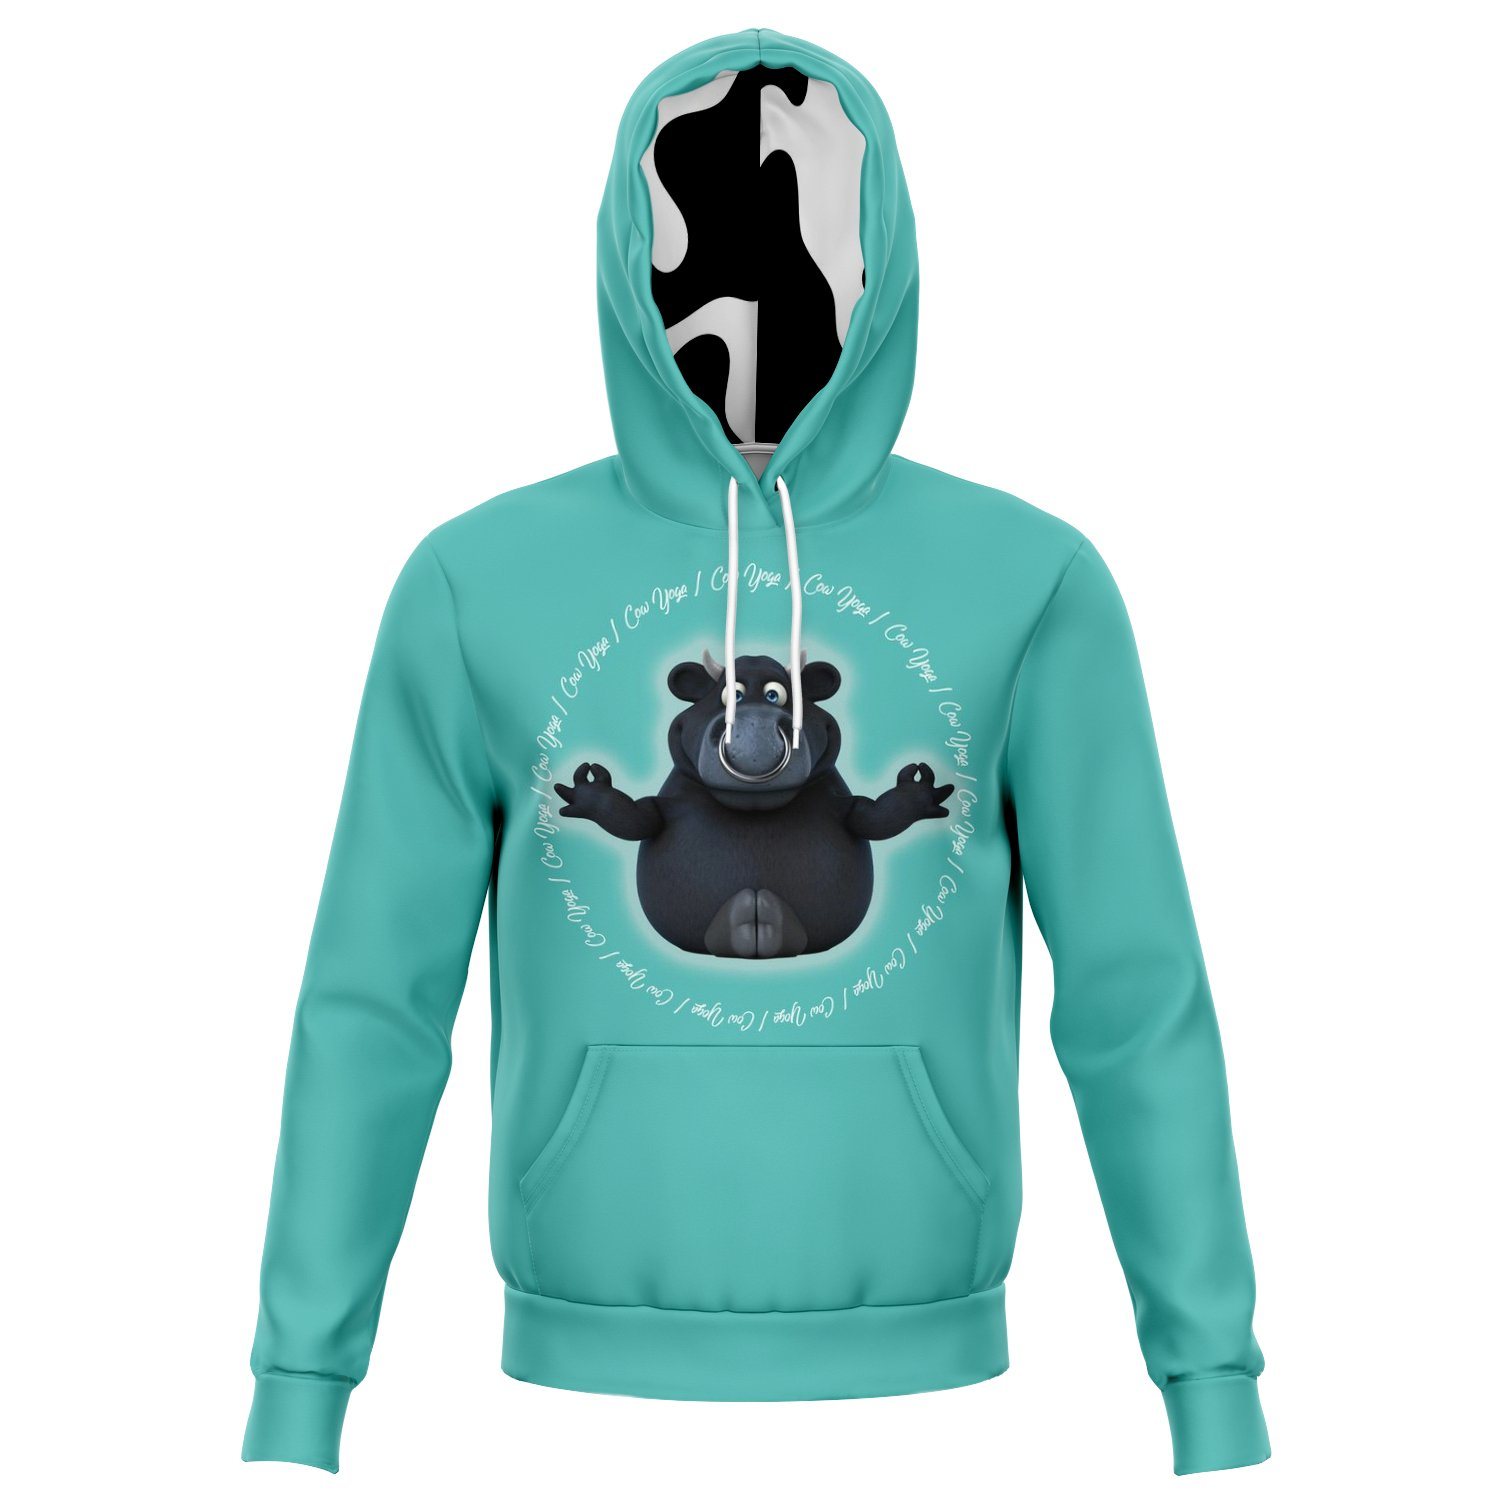 Cow Yoga Hoodie CL1211 XS Official COW PRINT Merch